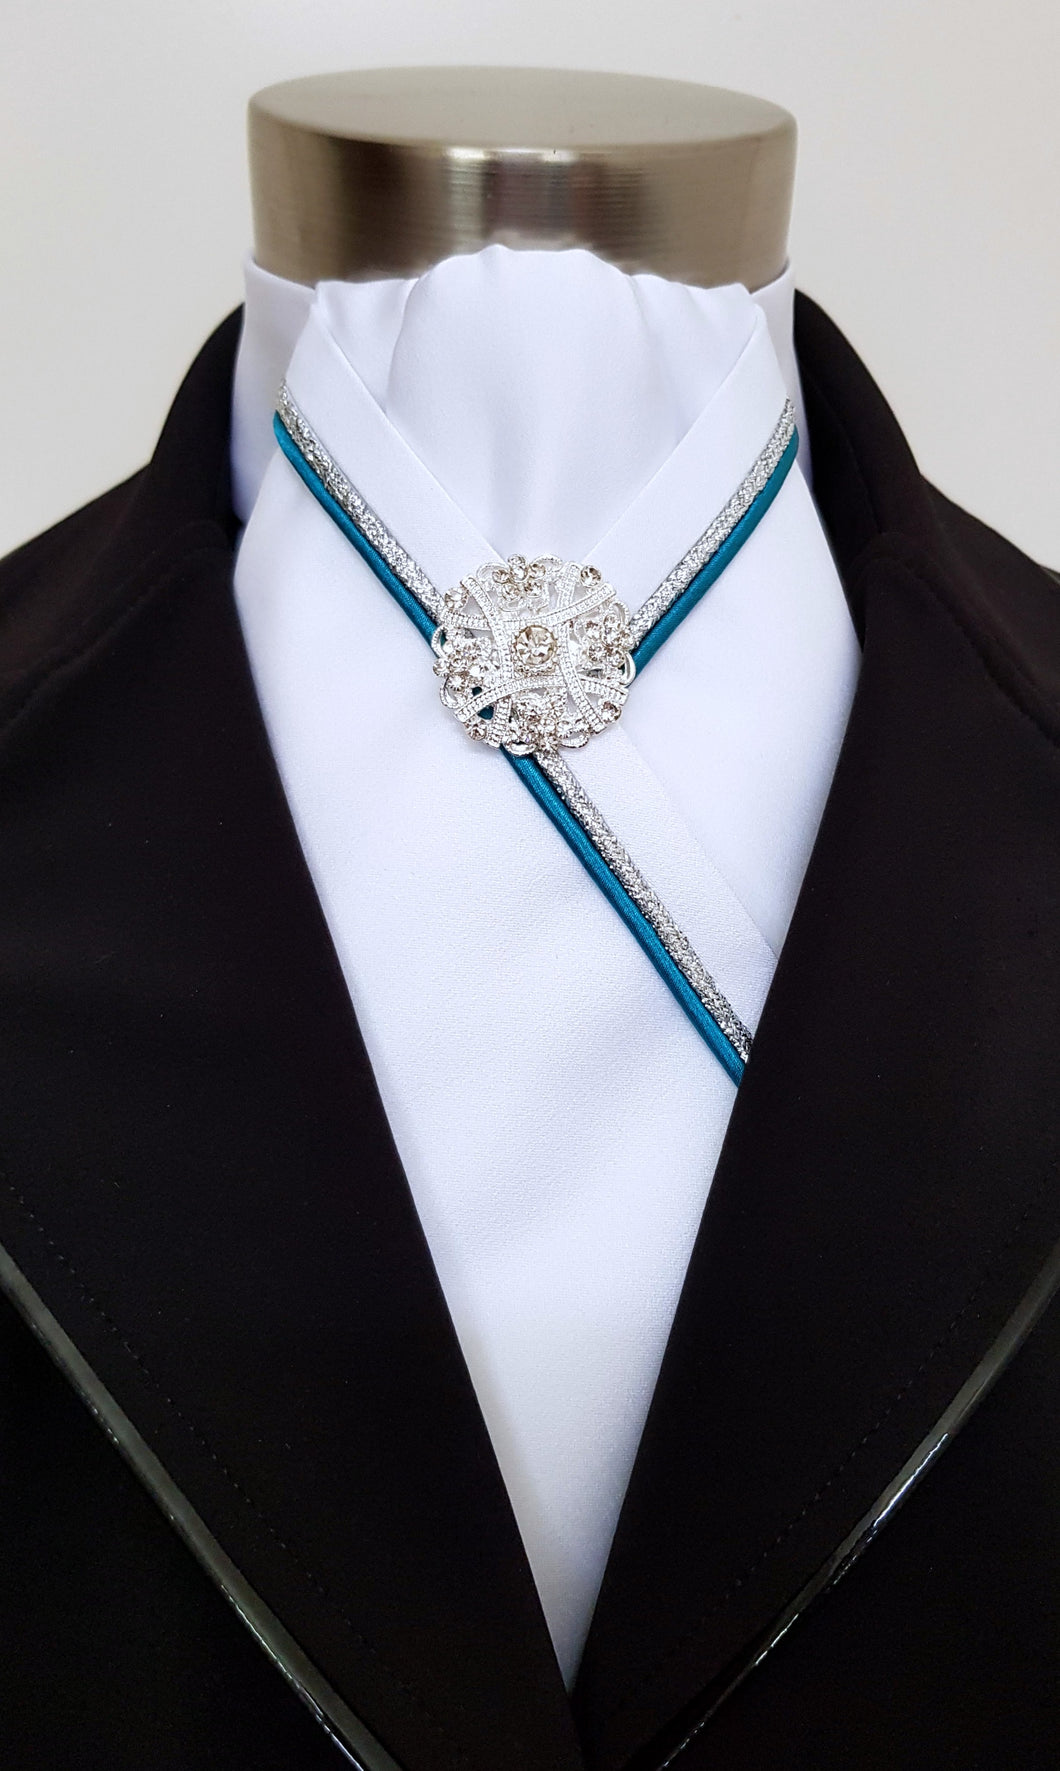 ERA RACHAEL STOCK TIE - White satin with teal and silver piping & brooch